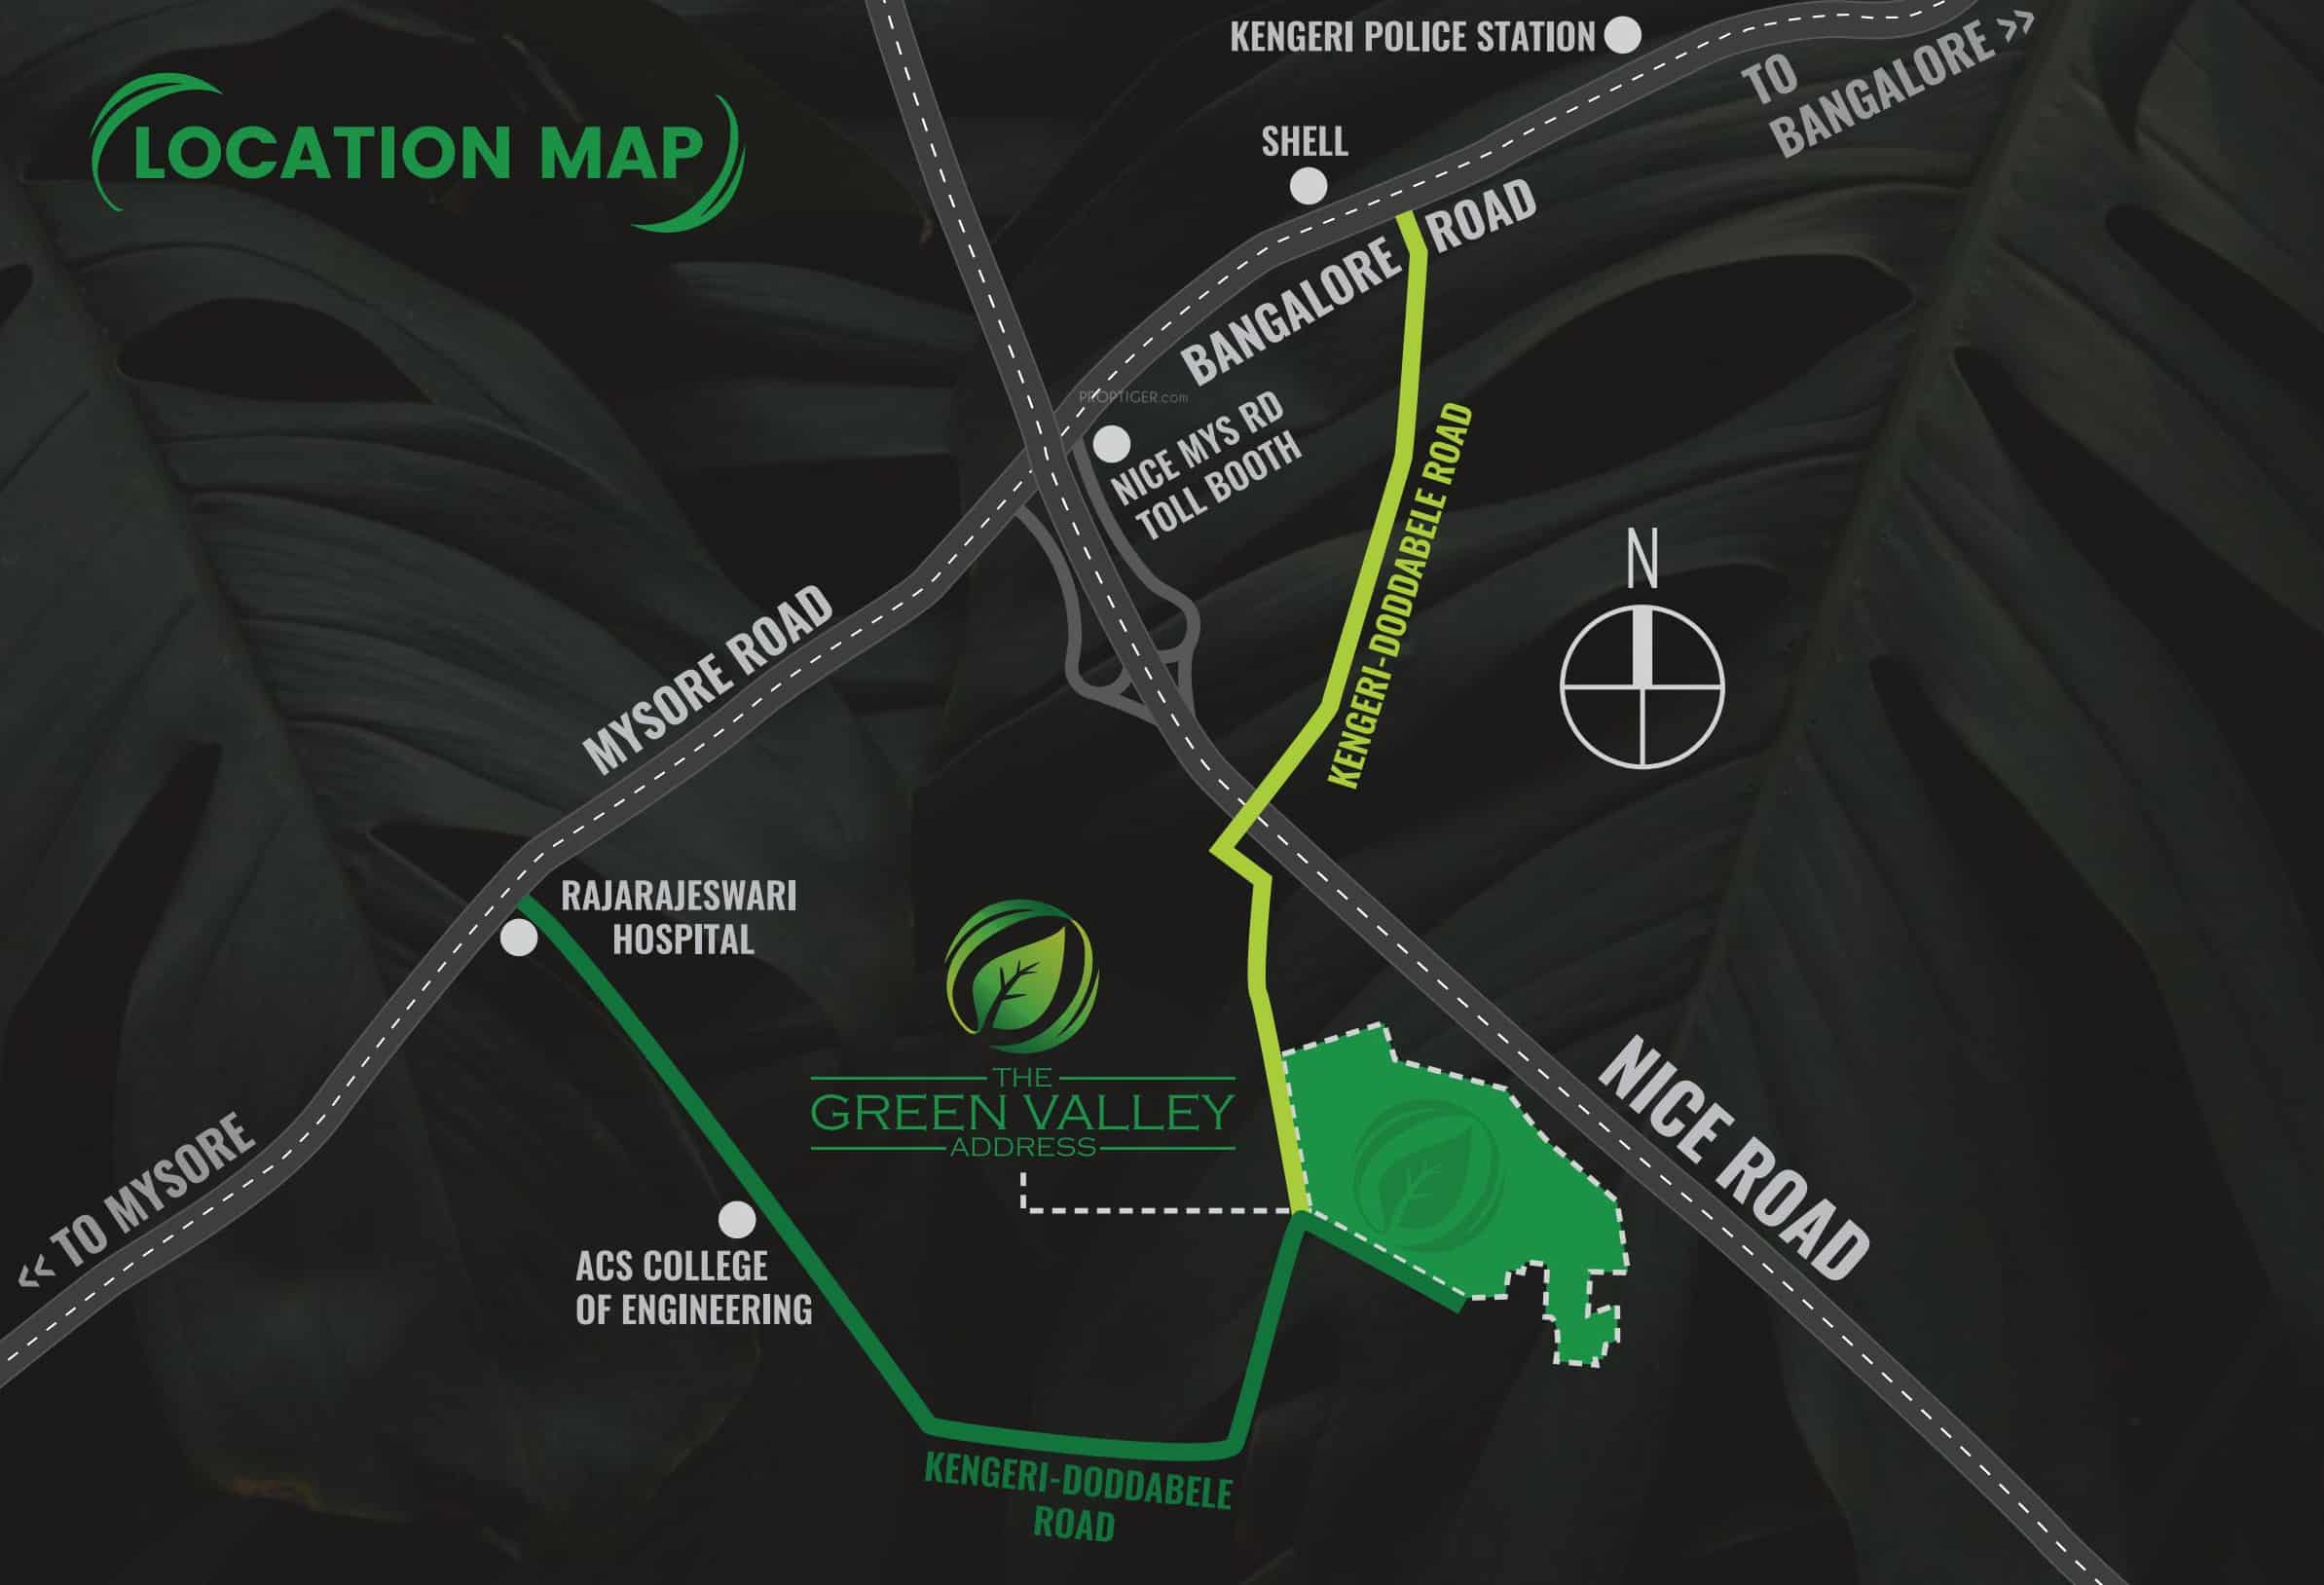 The Green Valley Address Location Map